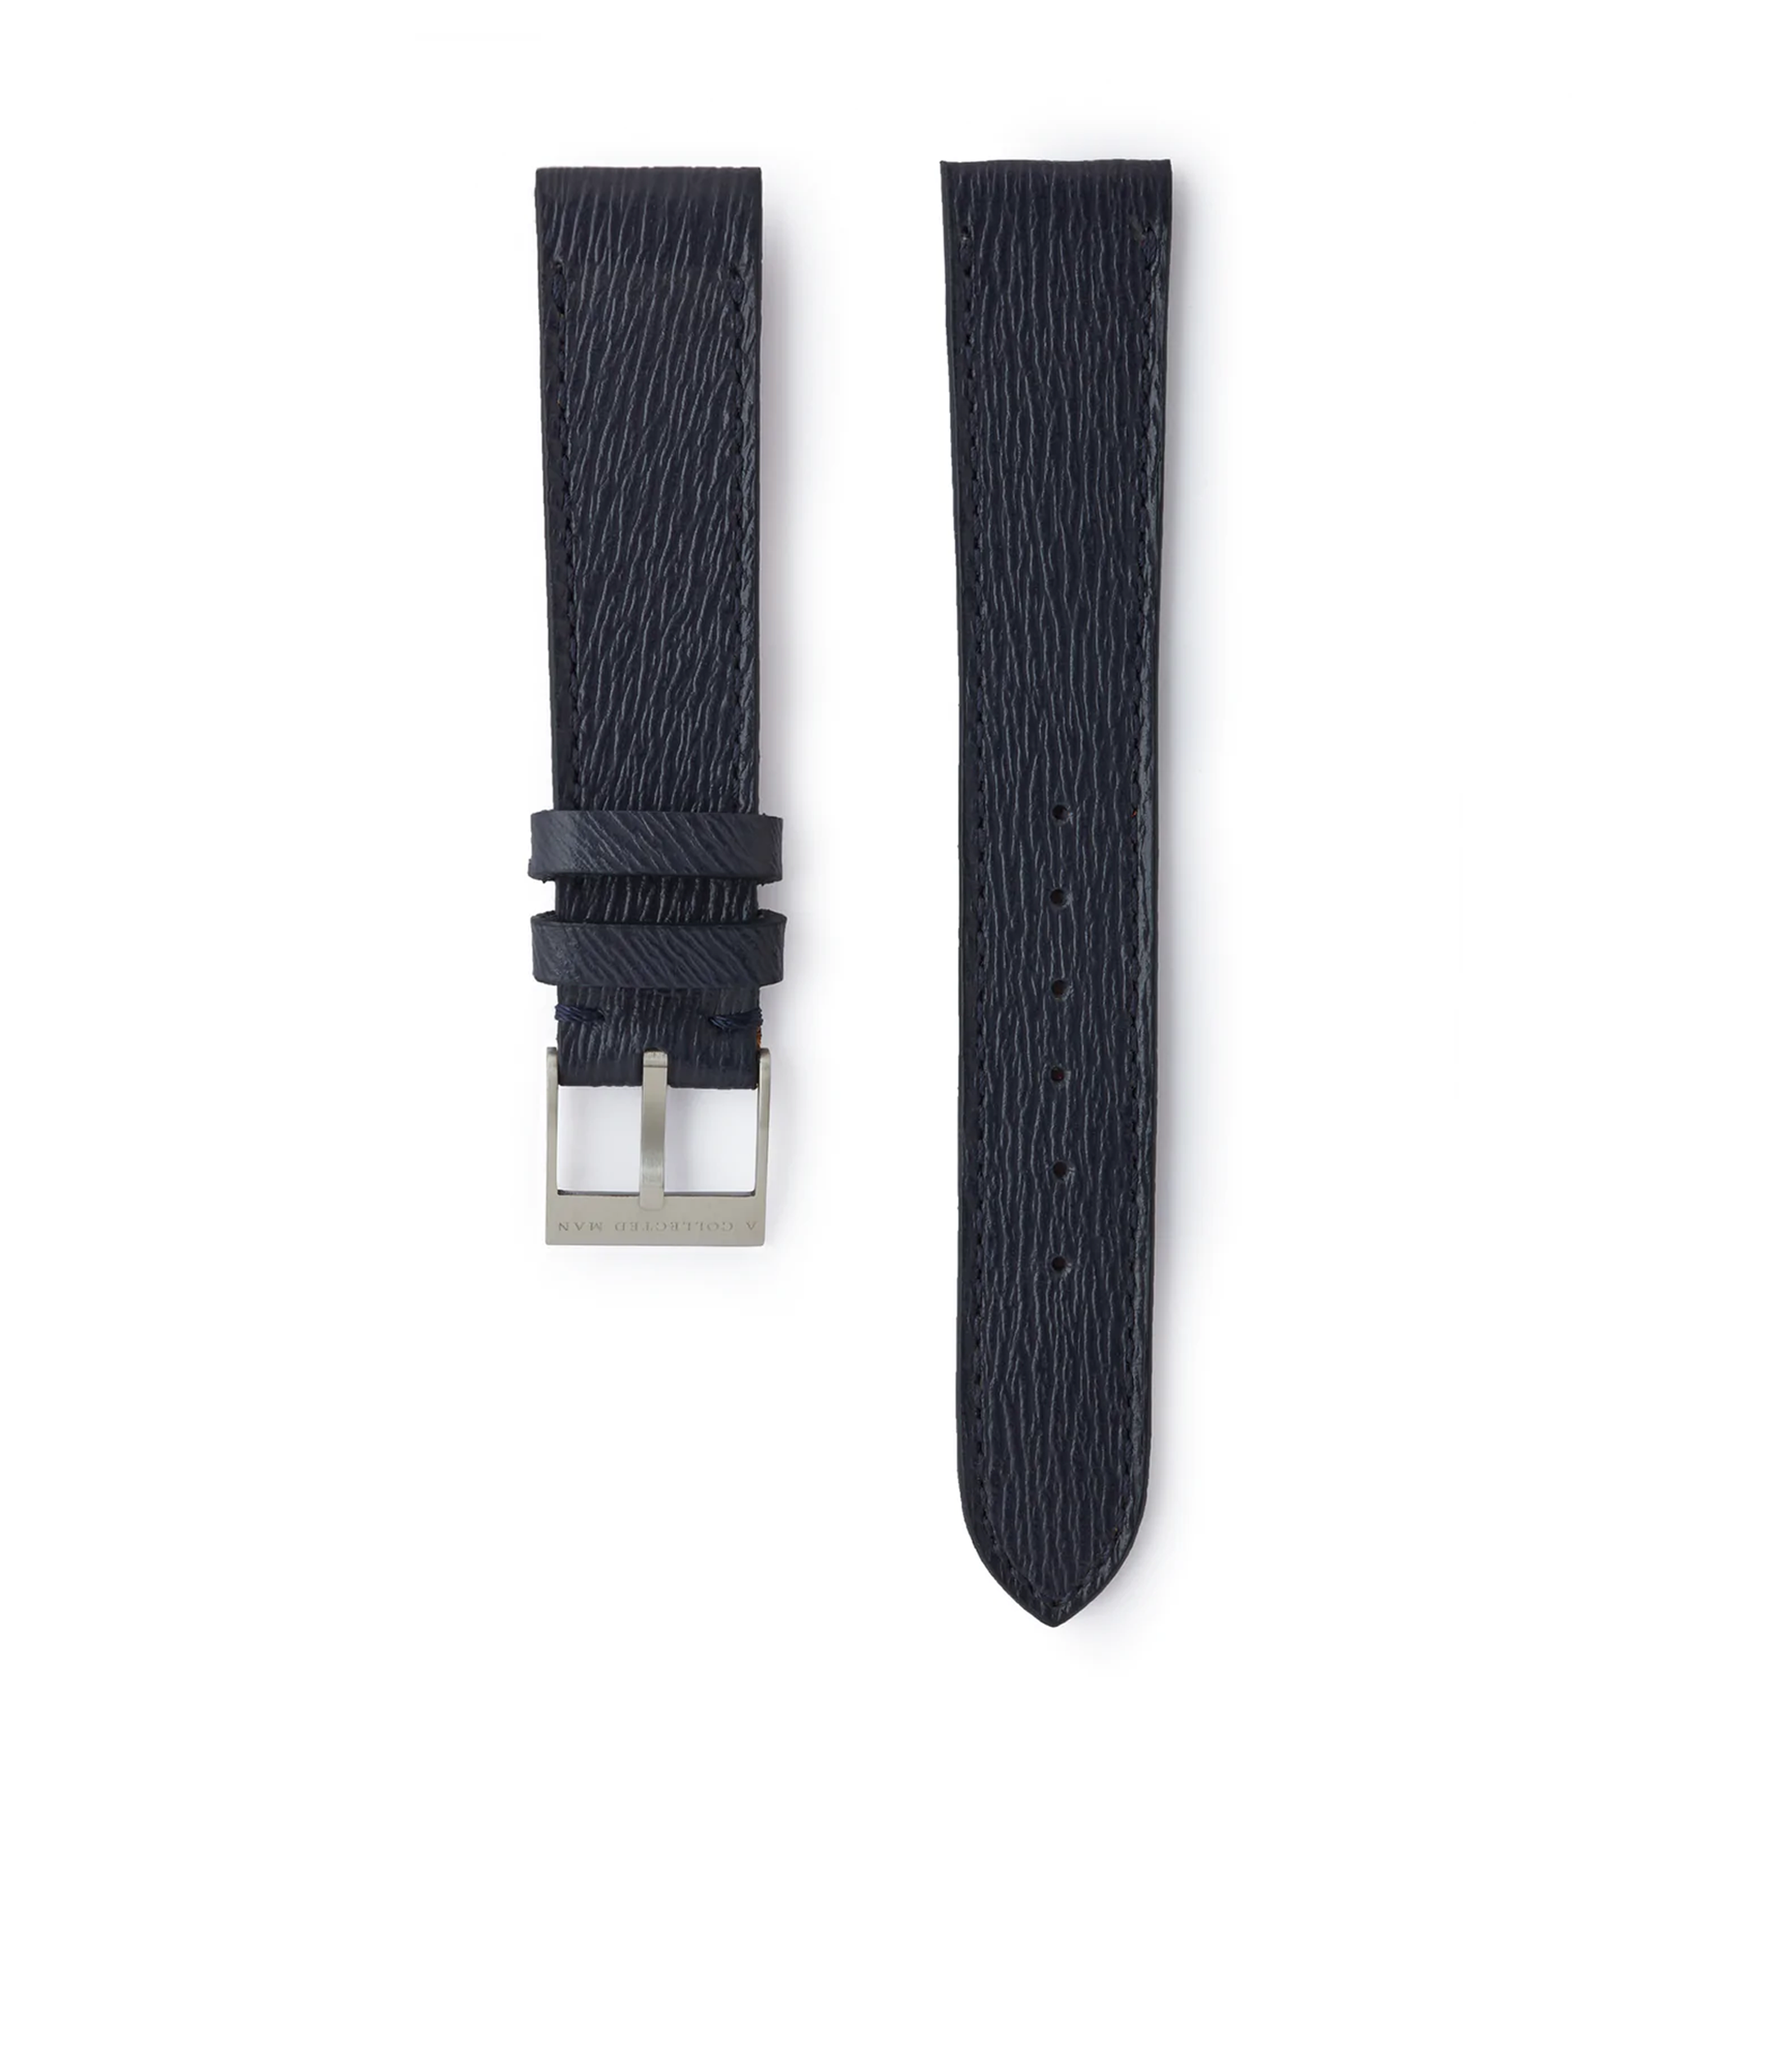 Order Santorini JPM watch strap navy blue saffiano leather quick-release springbars buckle handcrafted European-made for sale online at A Collected Man London